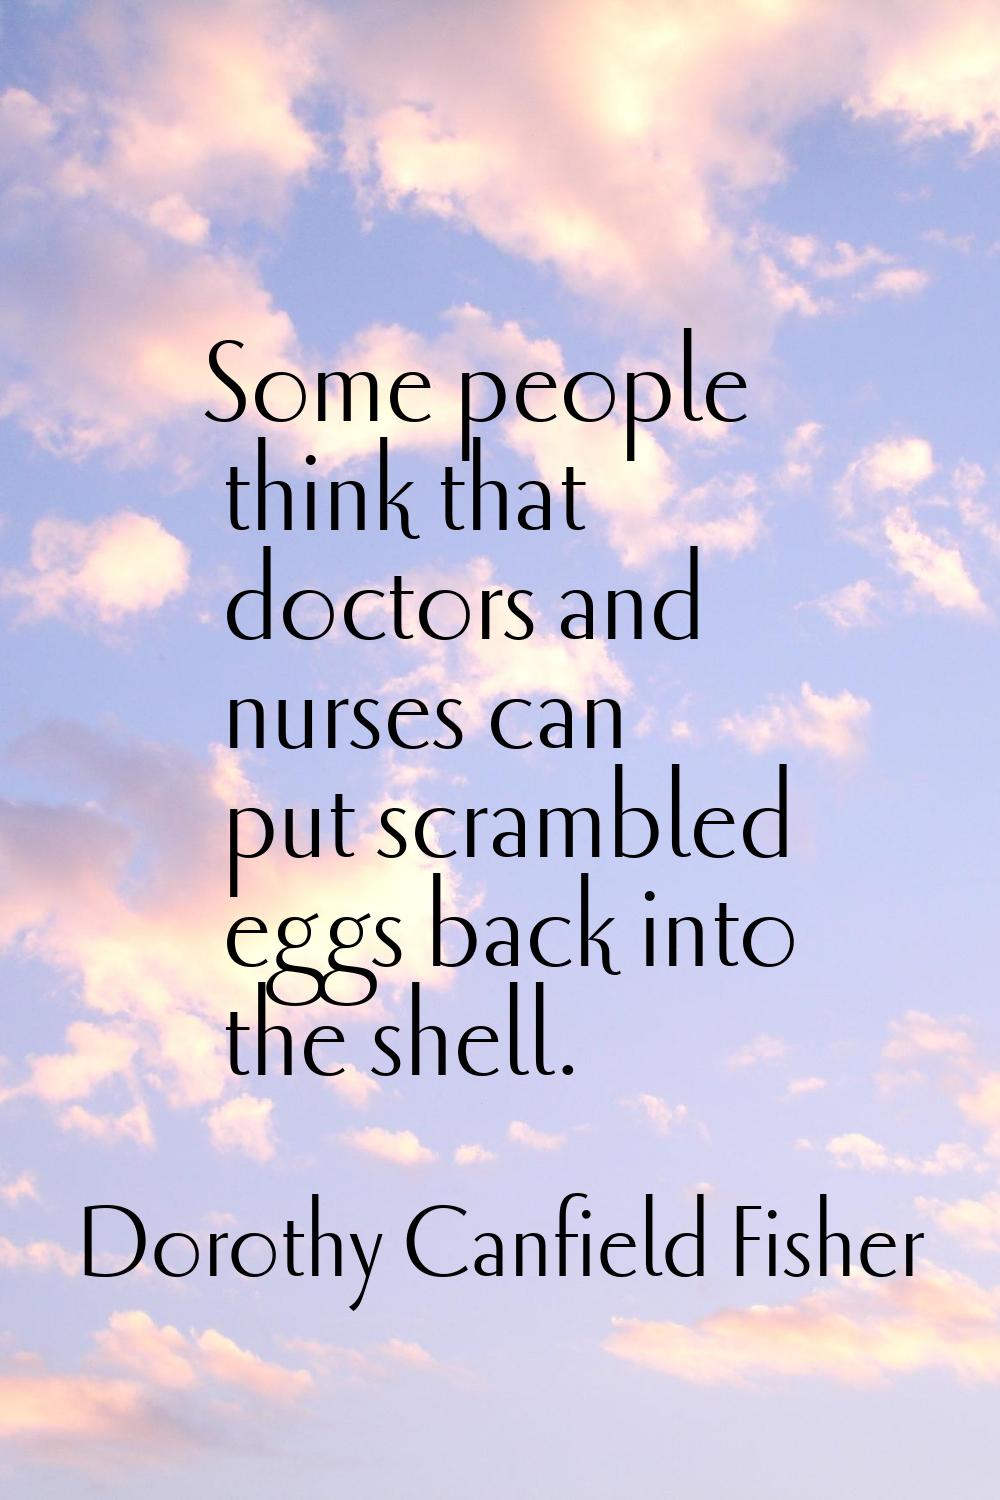 Some people think that doctors and nurses can put scrambled eggs back into the shell.